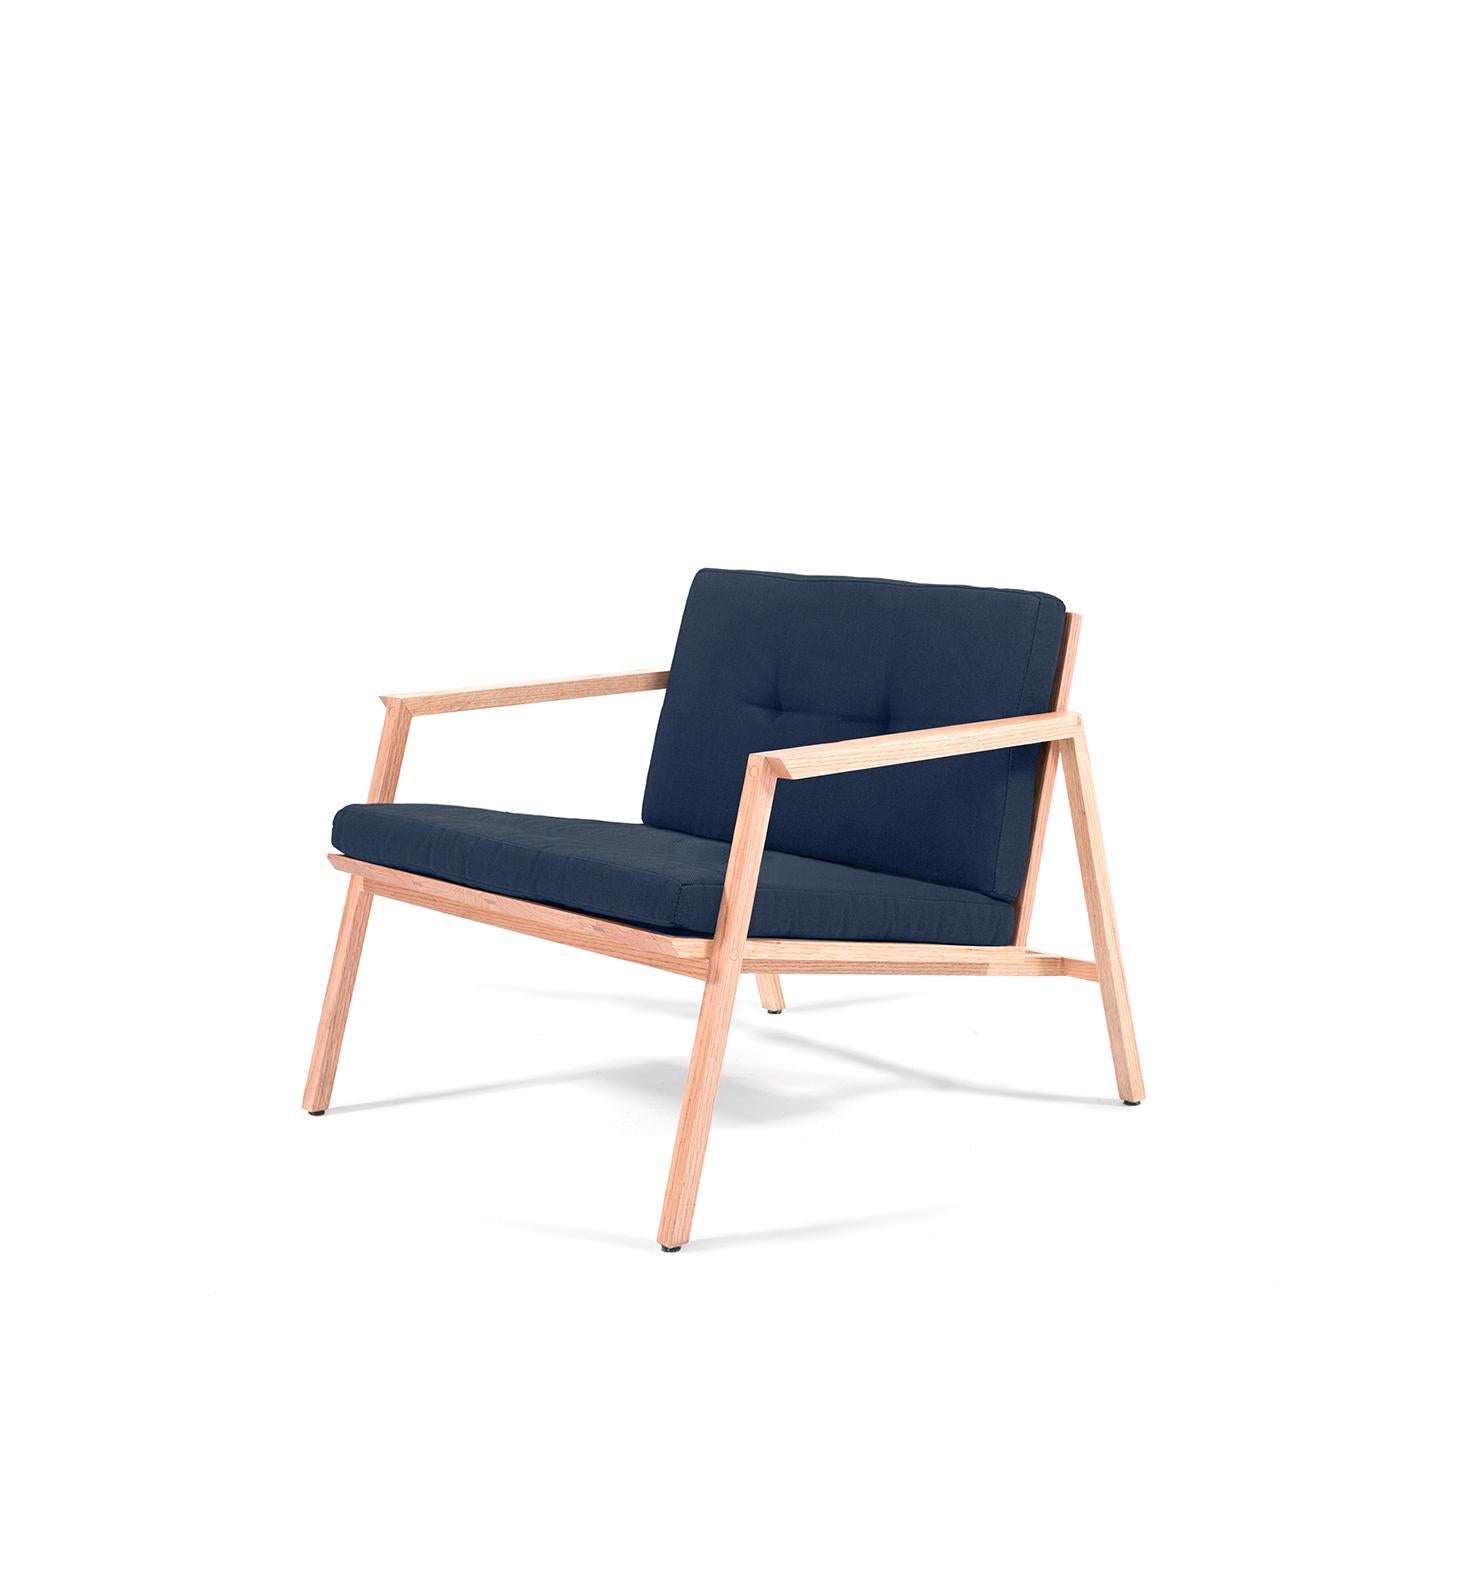 Tumbona Dedo, Mexican Contemporary Lounge Chair by Emiliano Molina for CUCHARA For Sale 5